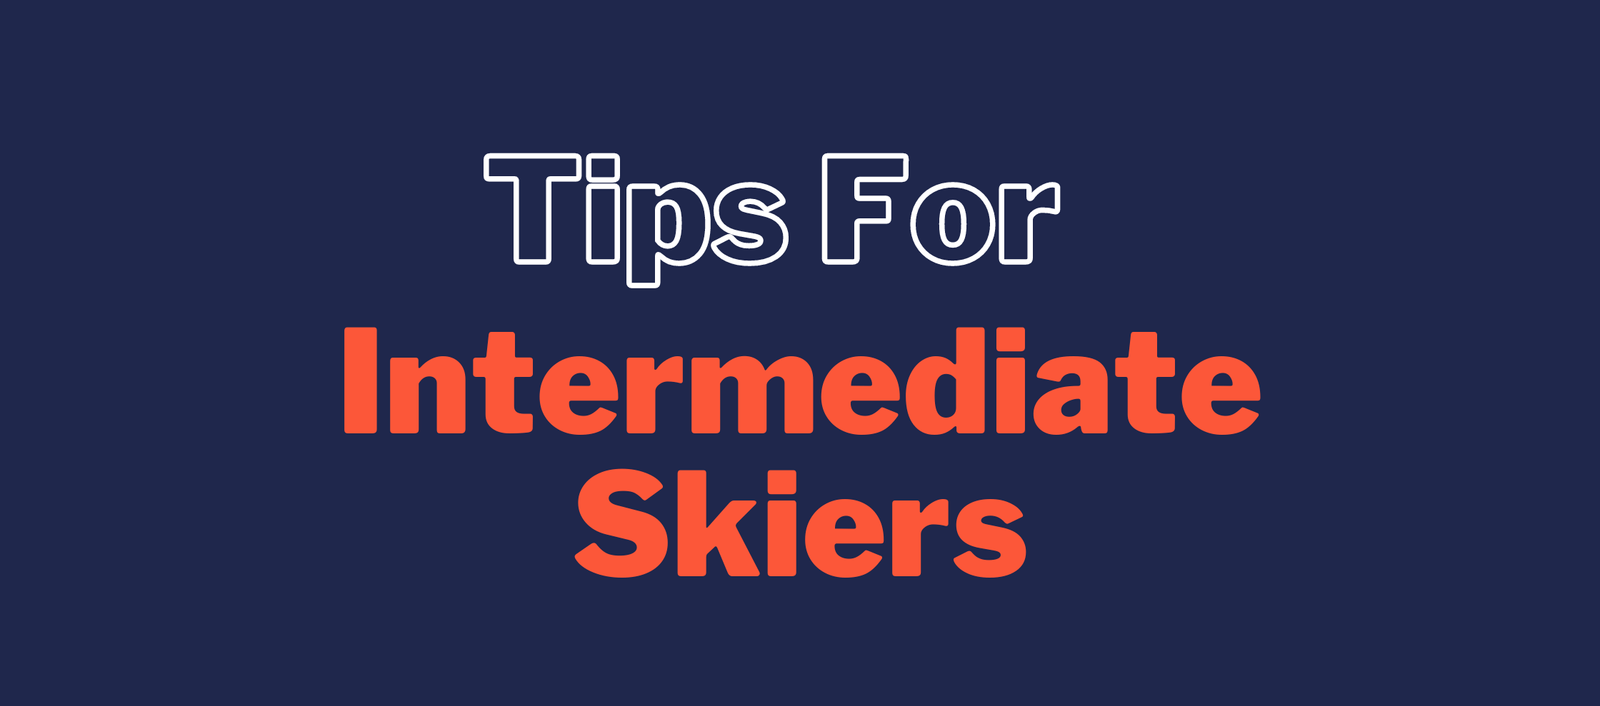 Tips for intermeditae skiers